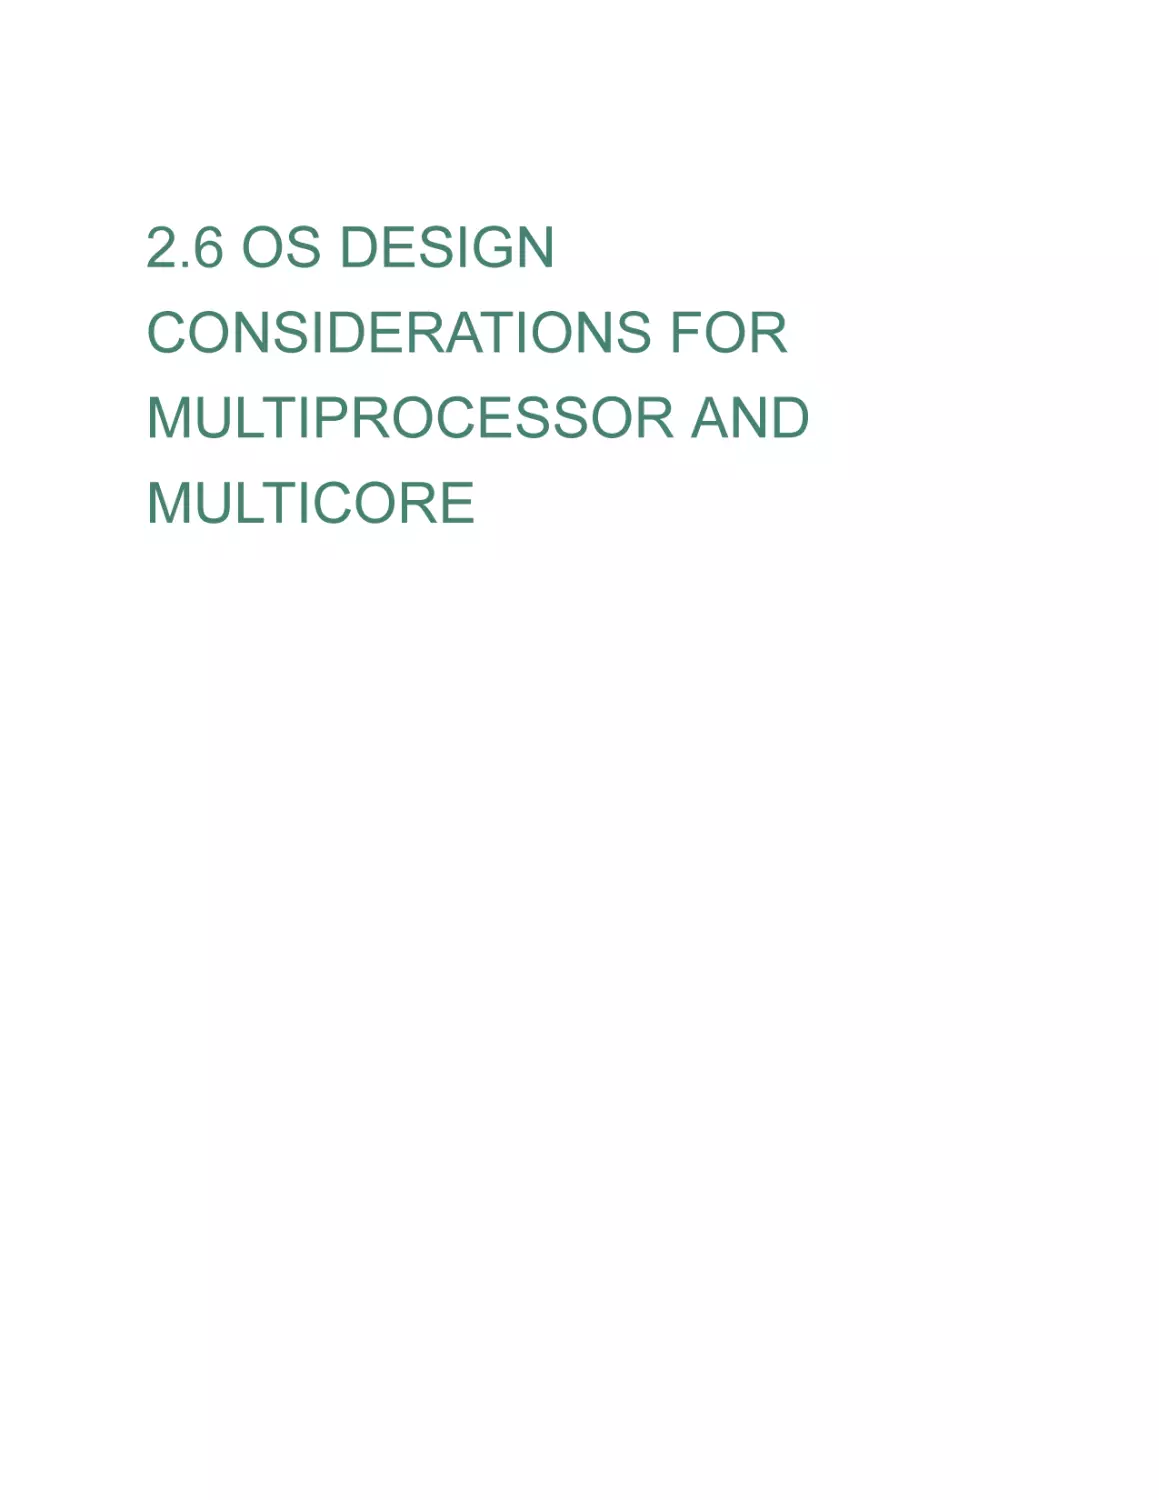 2.6 OS DESIGN CONSIDERATIONS FOR MULTIPROCESSOR AND MULTICORE